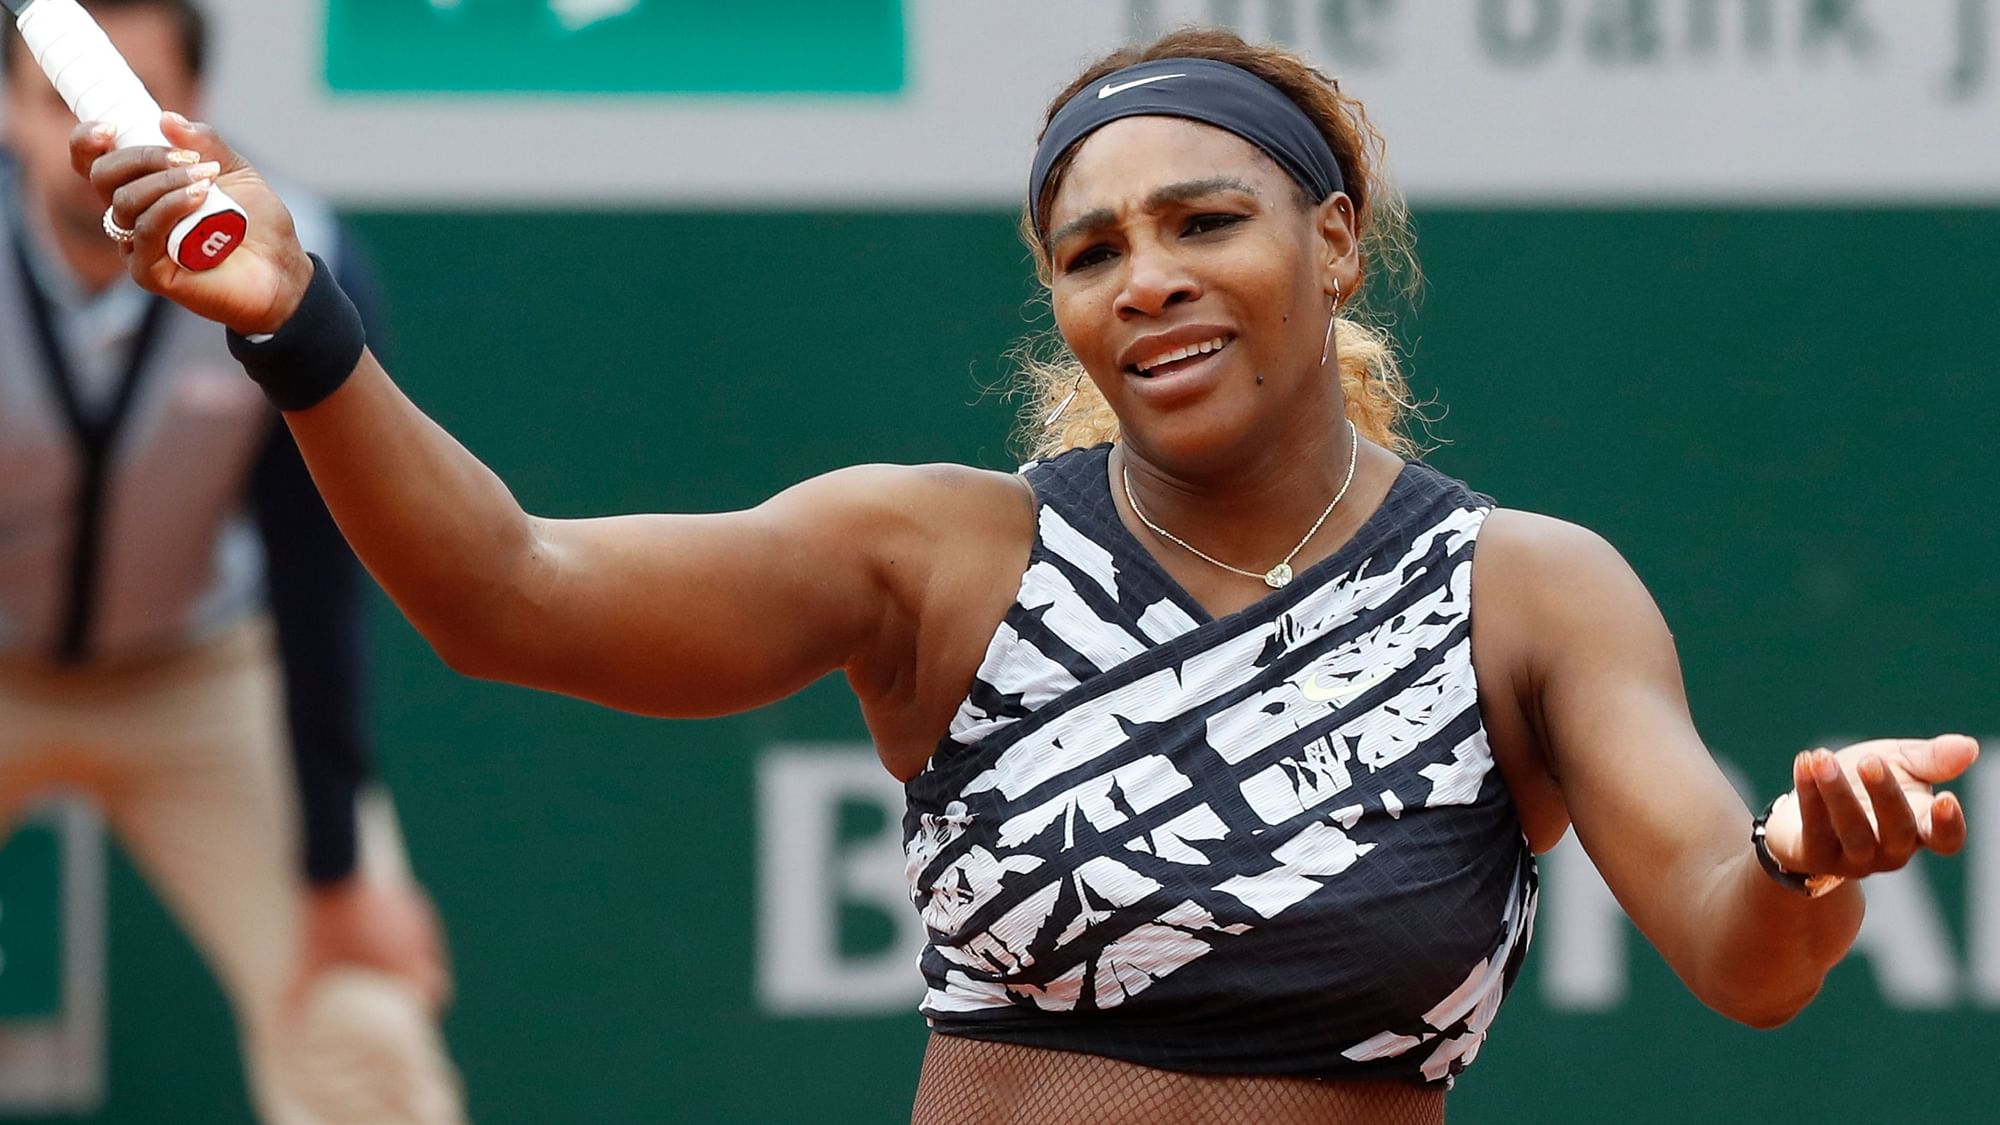 Serena Williams in action during her French Open round 1 match.